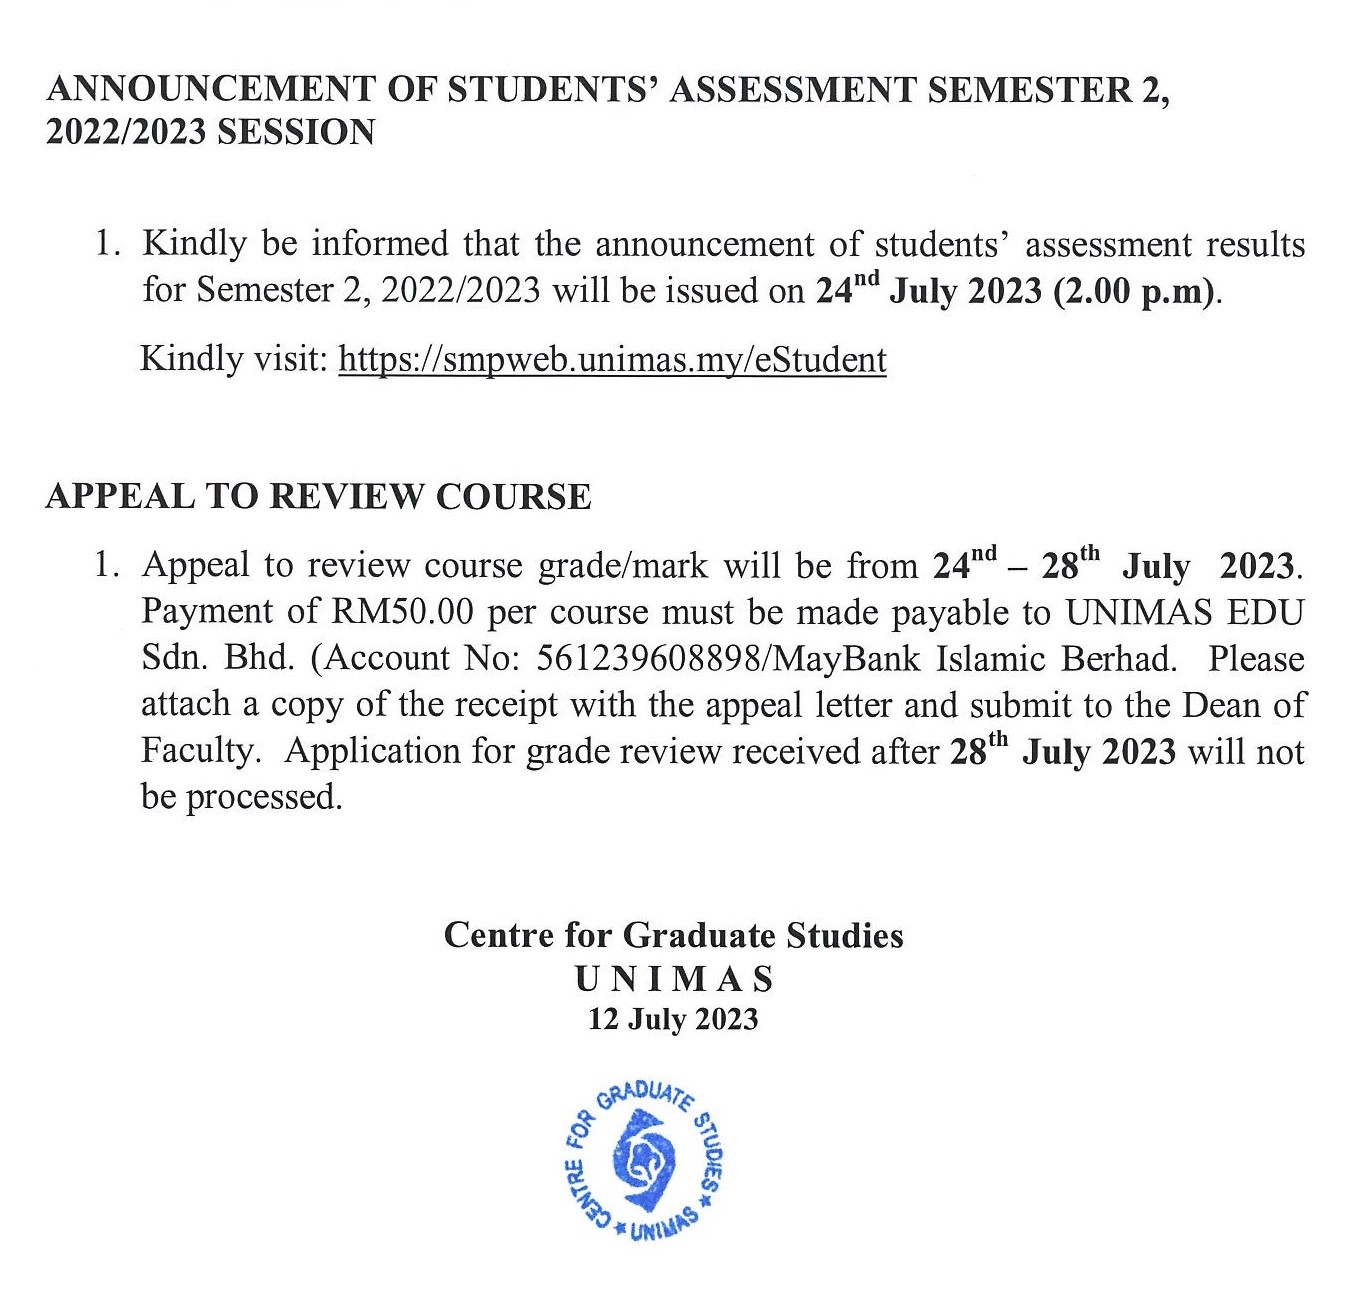 ANNOUNCEMENT OF STUDENTS’ ASSESSMENT SEMESTER 2, 20222023 SESSION (CALENDER ACADEMIC)A.jpg